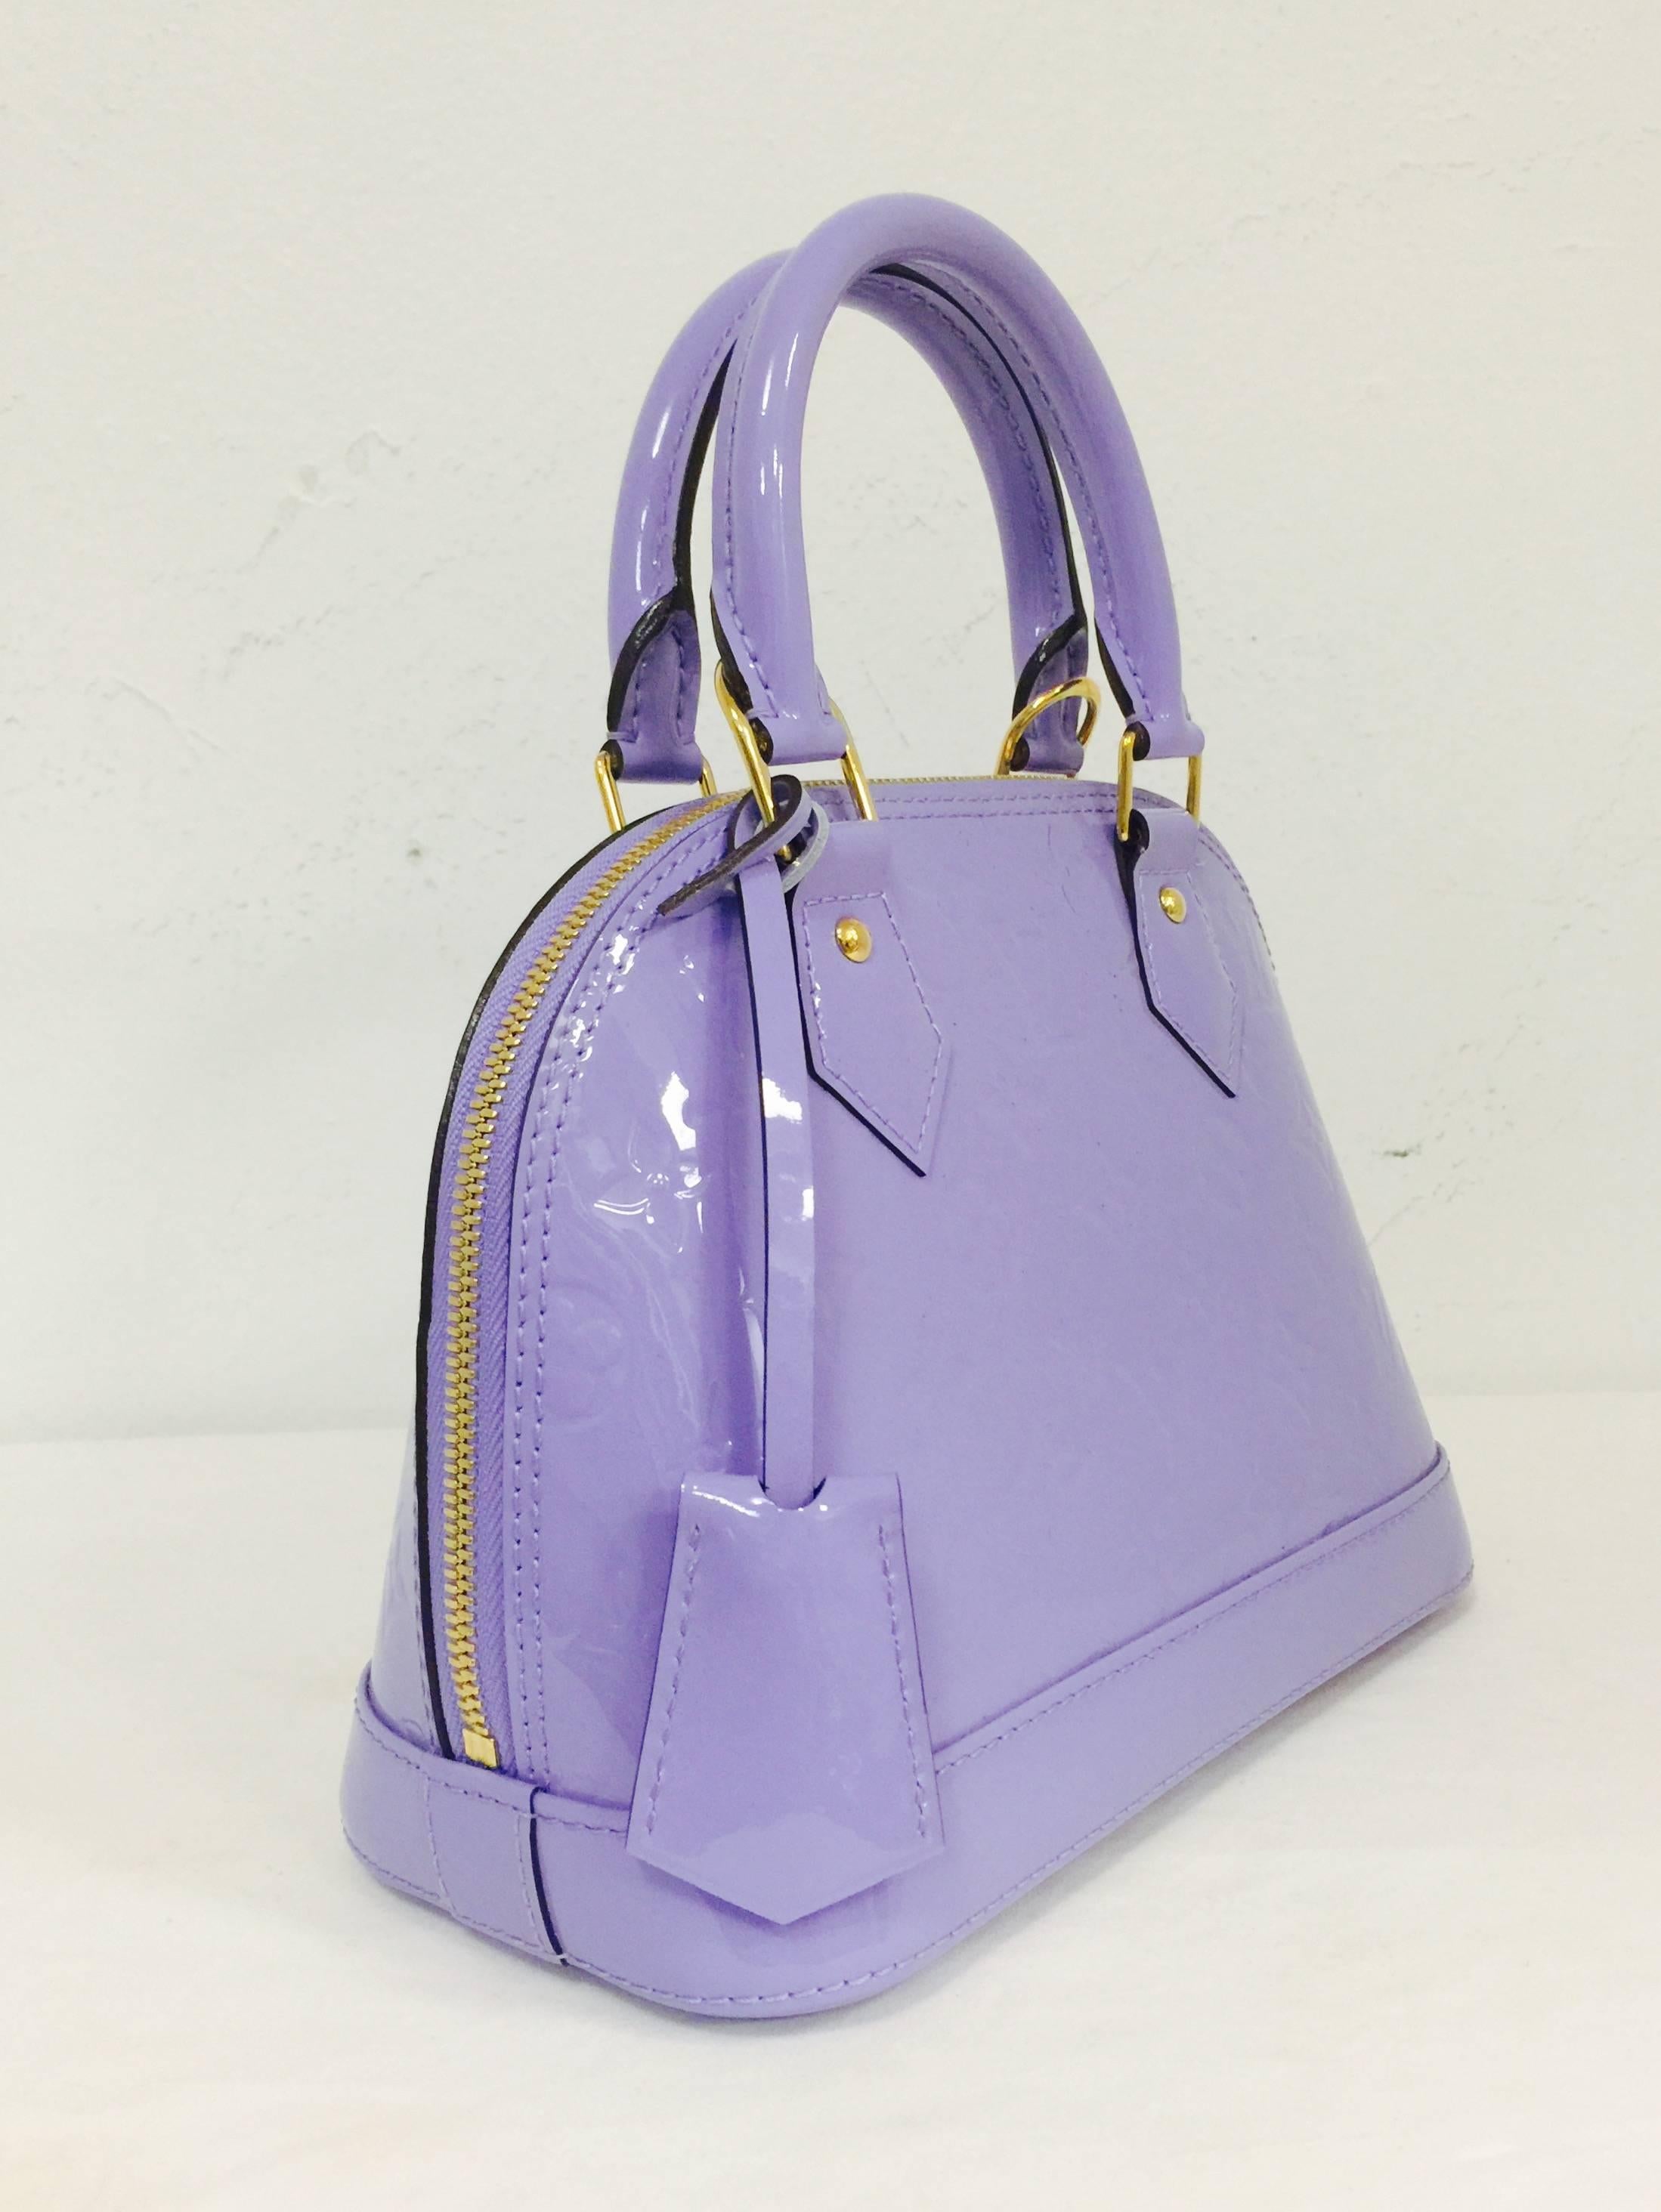 Louis Vuitton 2014 Spring Limited Edition Alma Lilias Bag is a must for any connoisseur of all things Louis!  Features the world renowned stamped patent leather (Vernis) in a luscious shade of lilac, gold tone hardware and a strap that easily